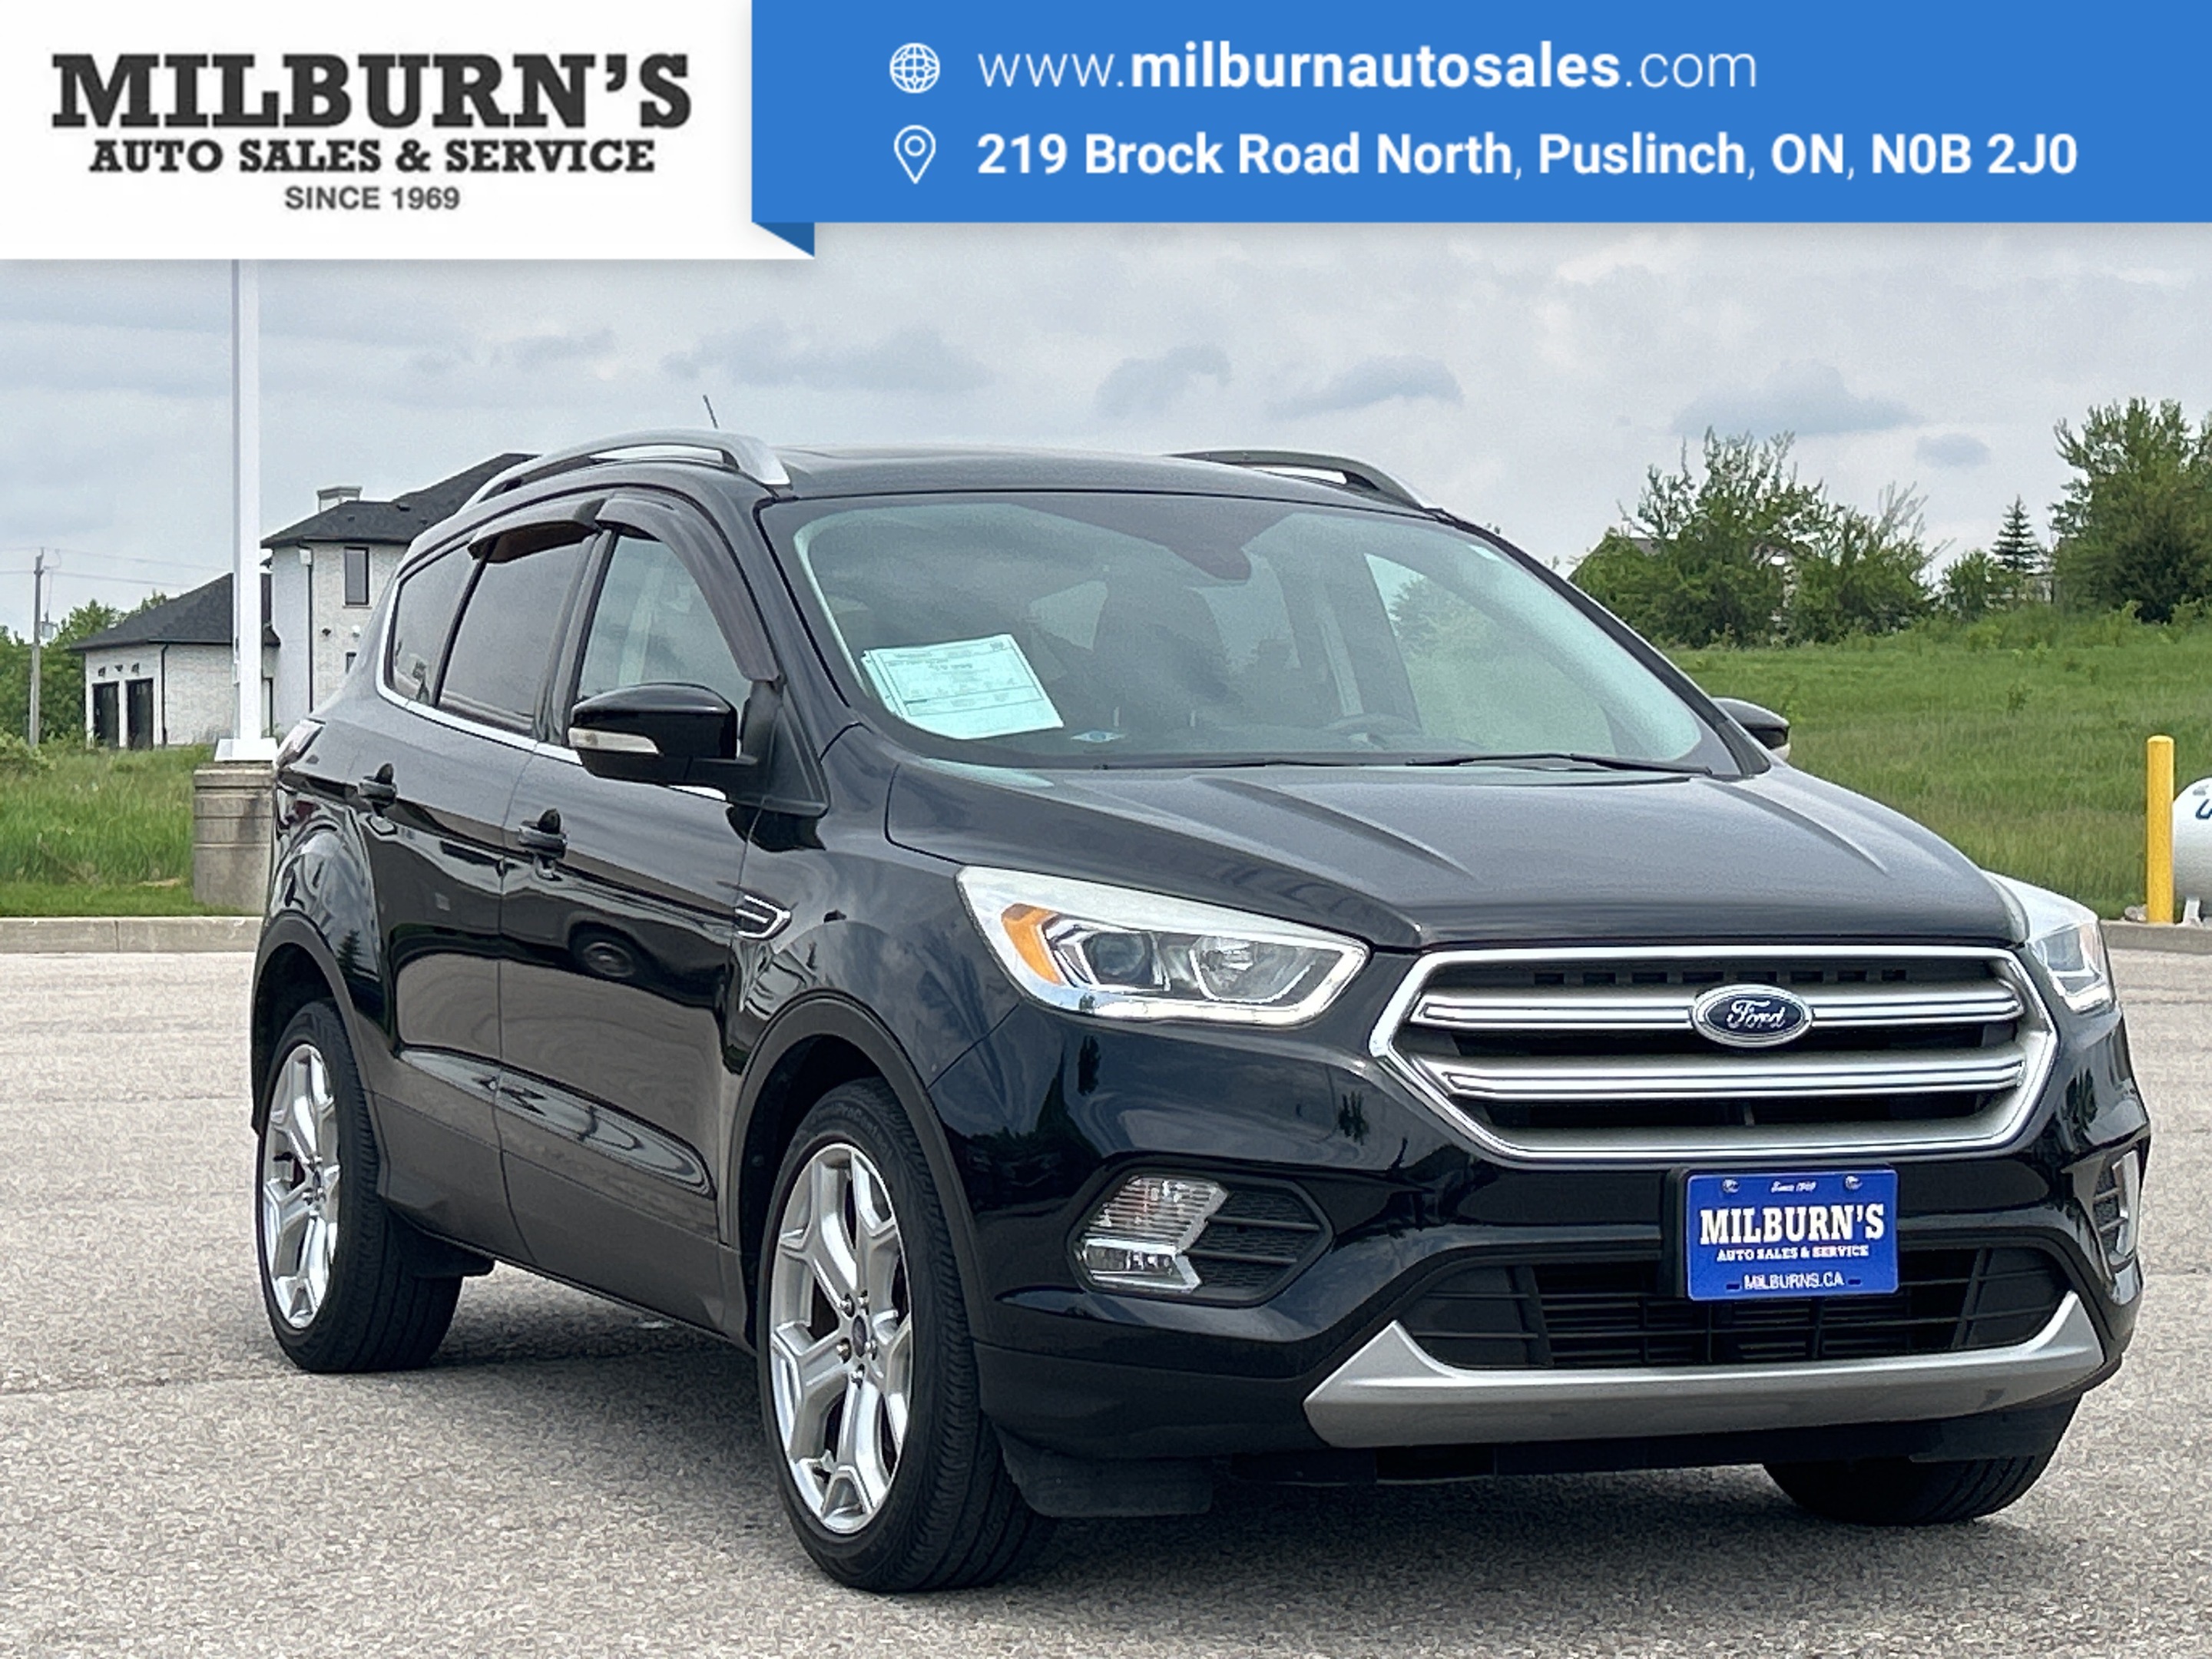 2017 Ford Escape Titanium FWD | Nav. | Pano Roof | Leather